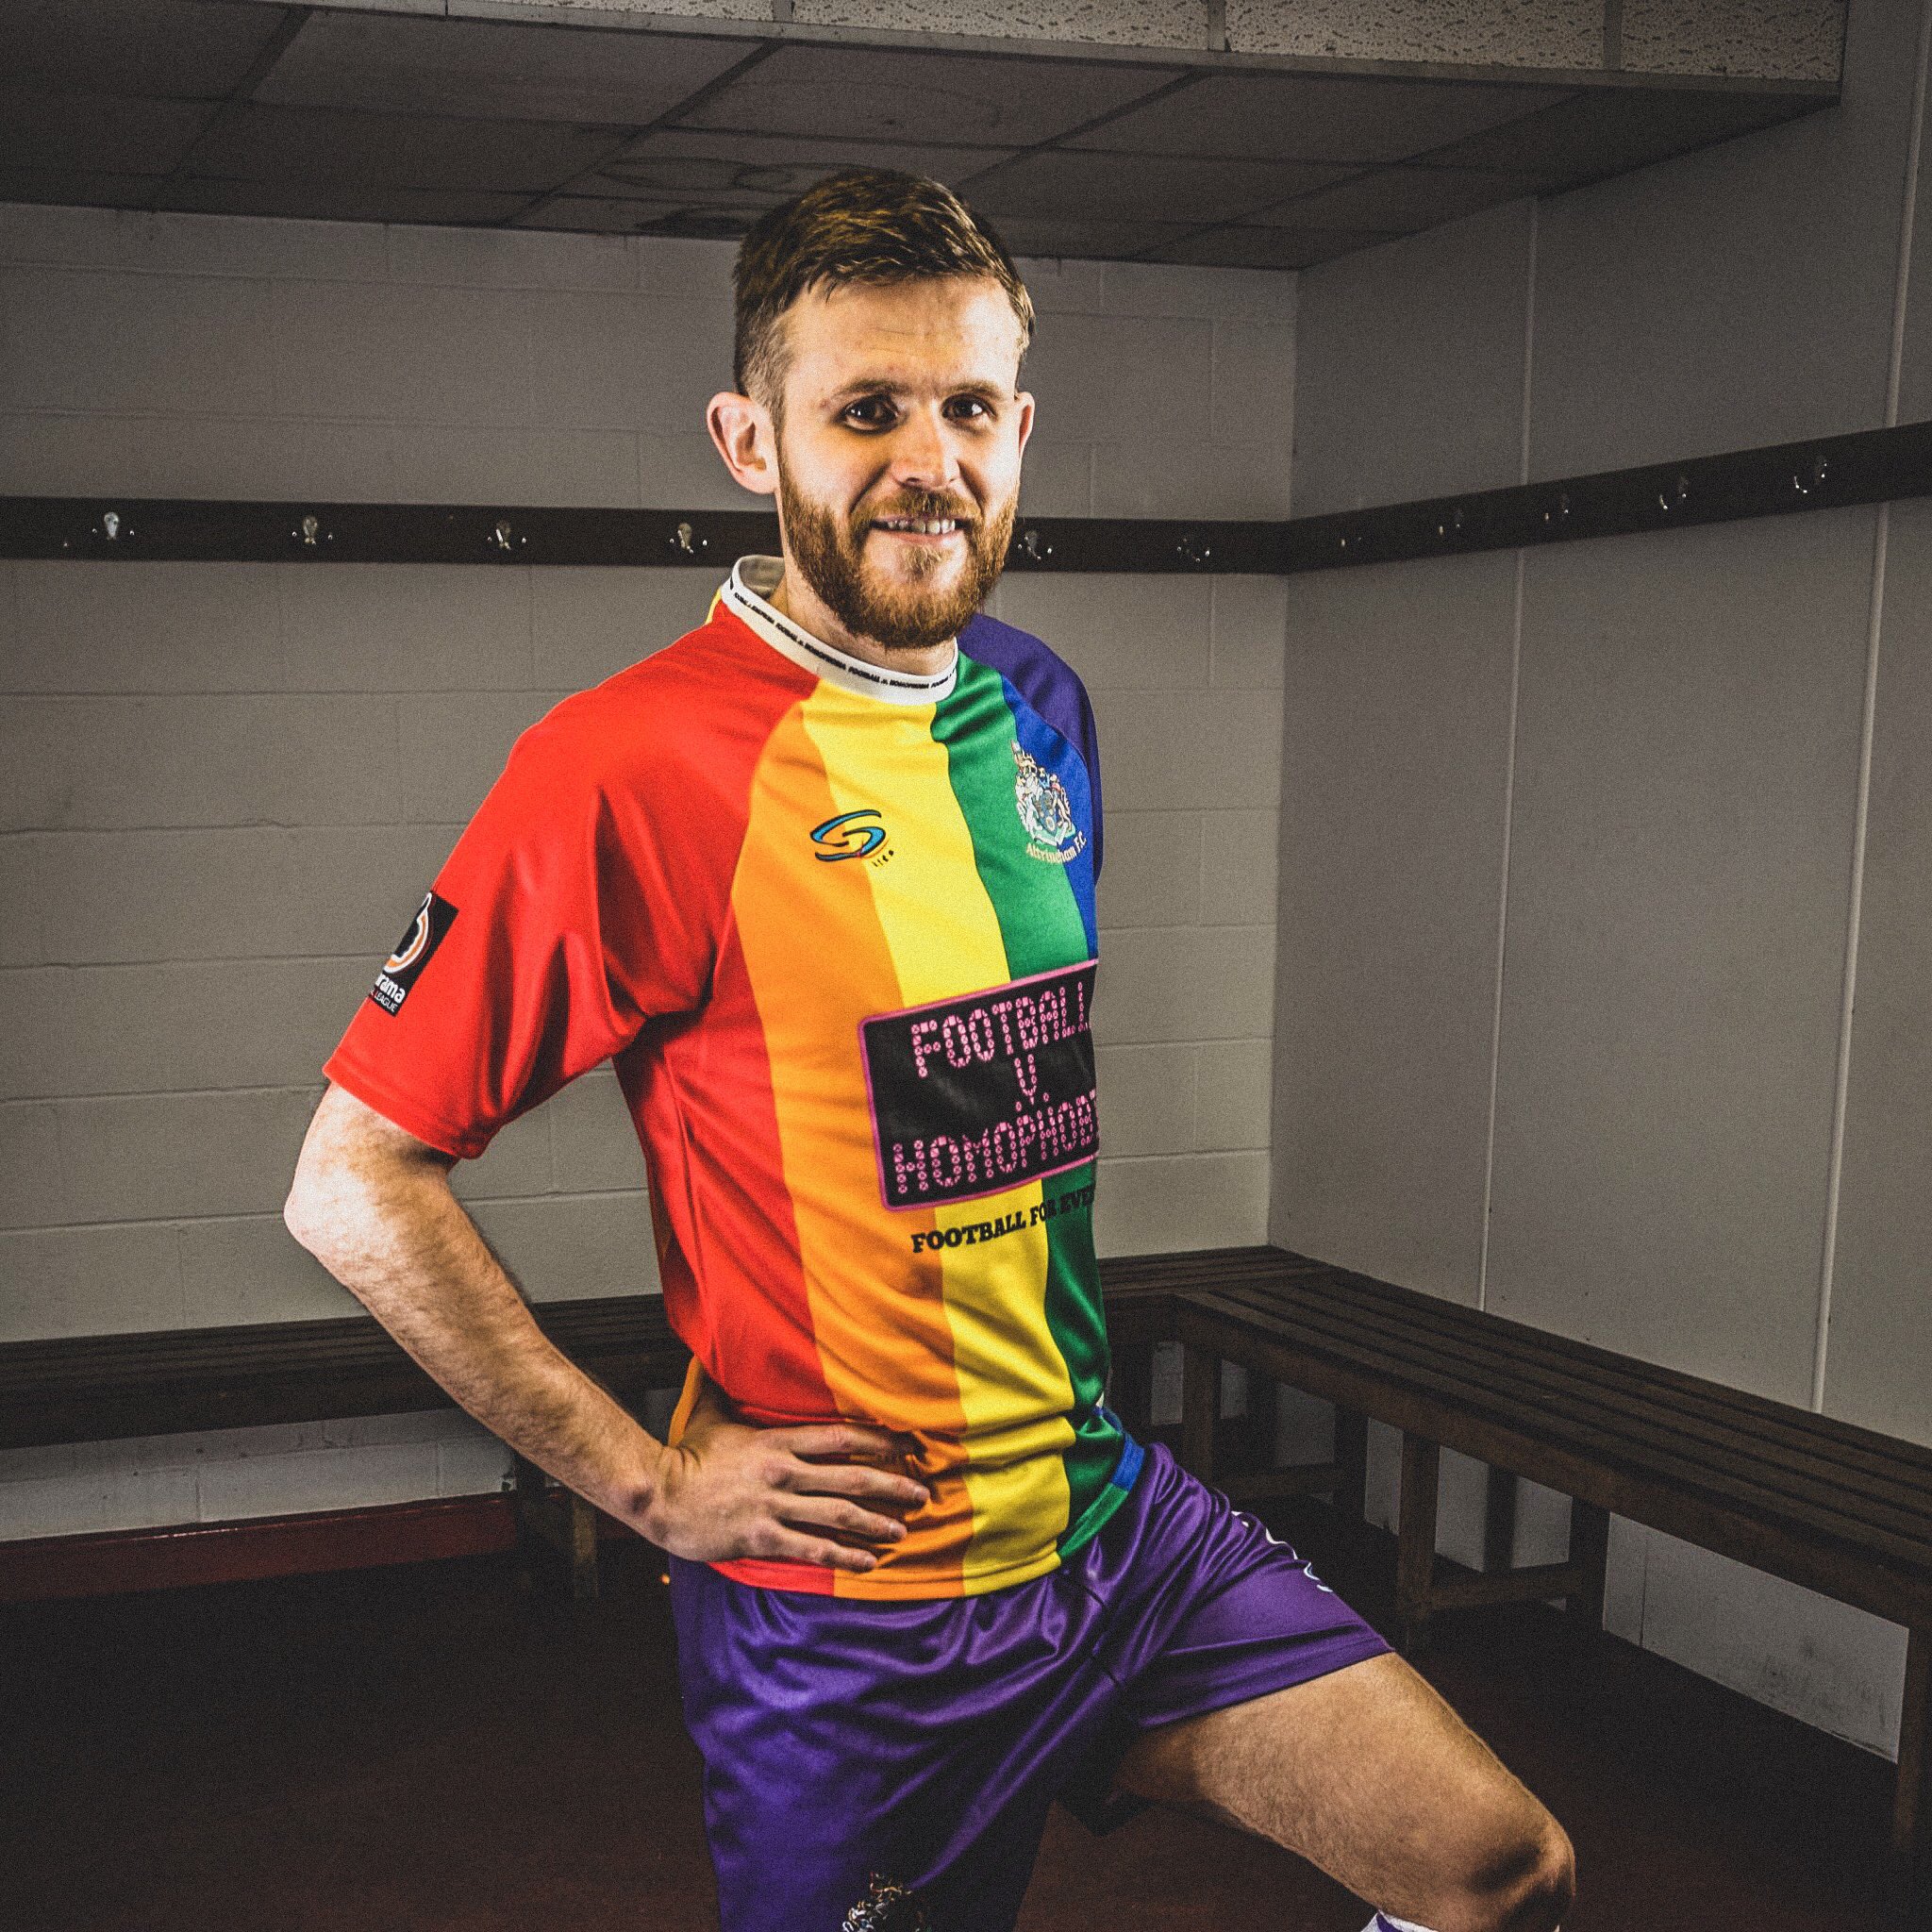 Altrincham FC promotes inclusion, diversity with LGBT flag-based kit